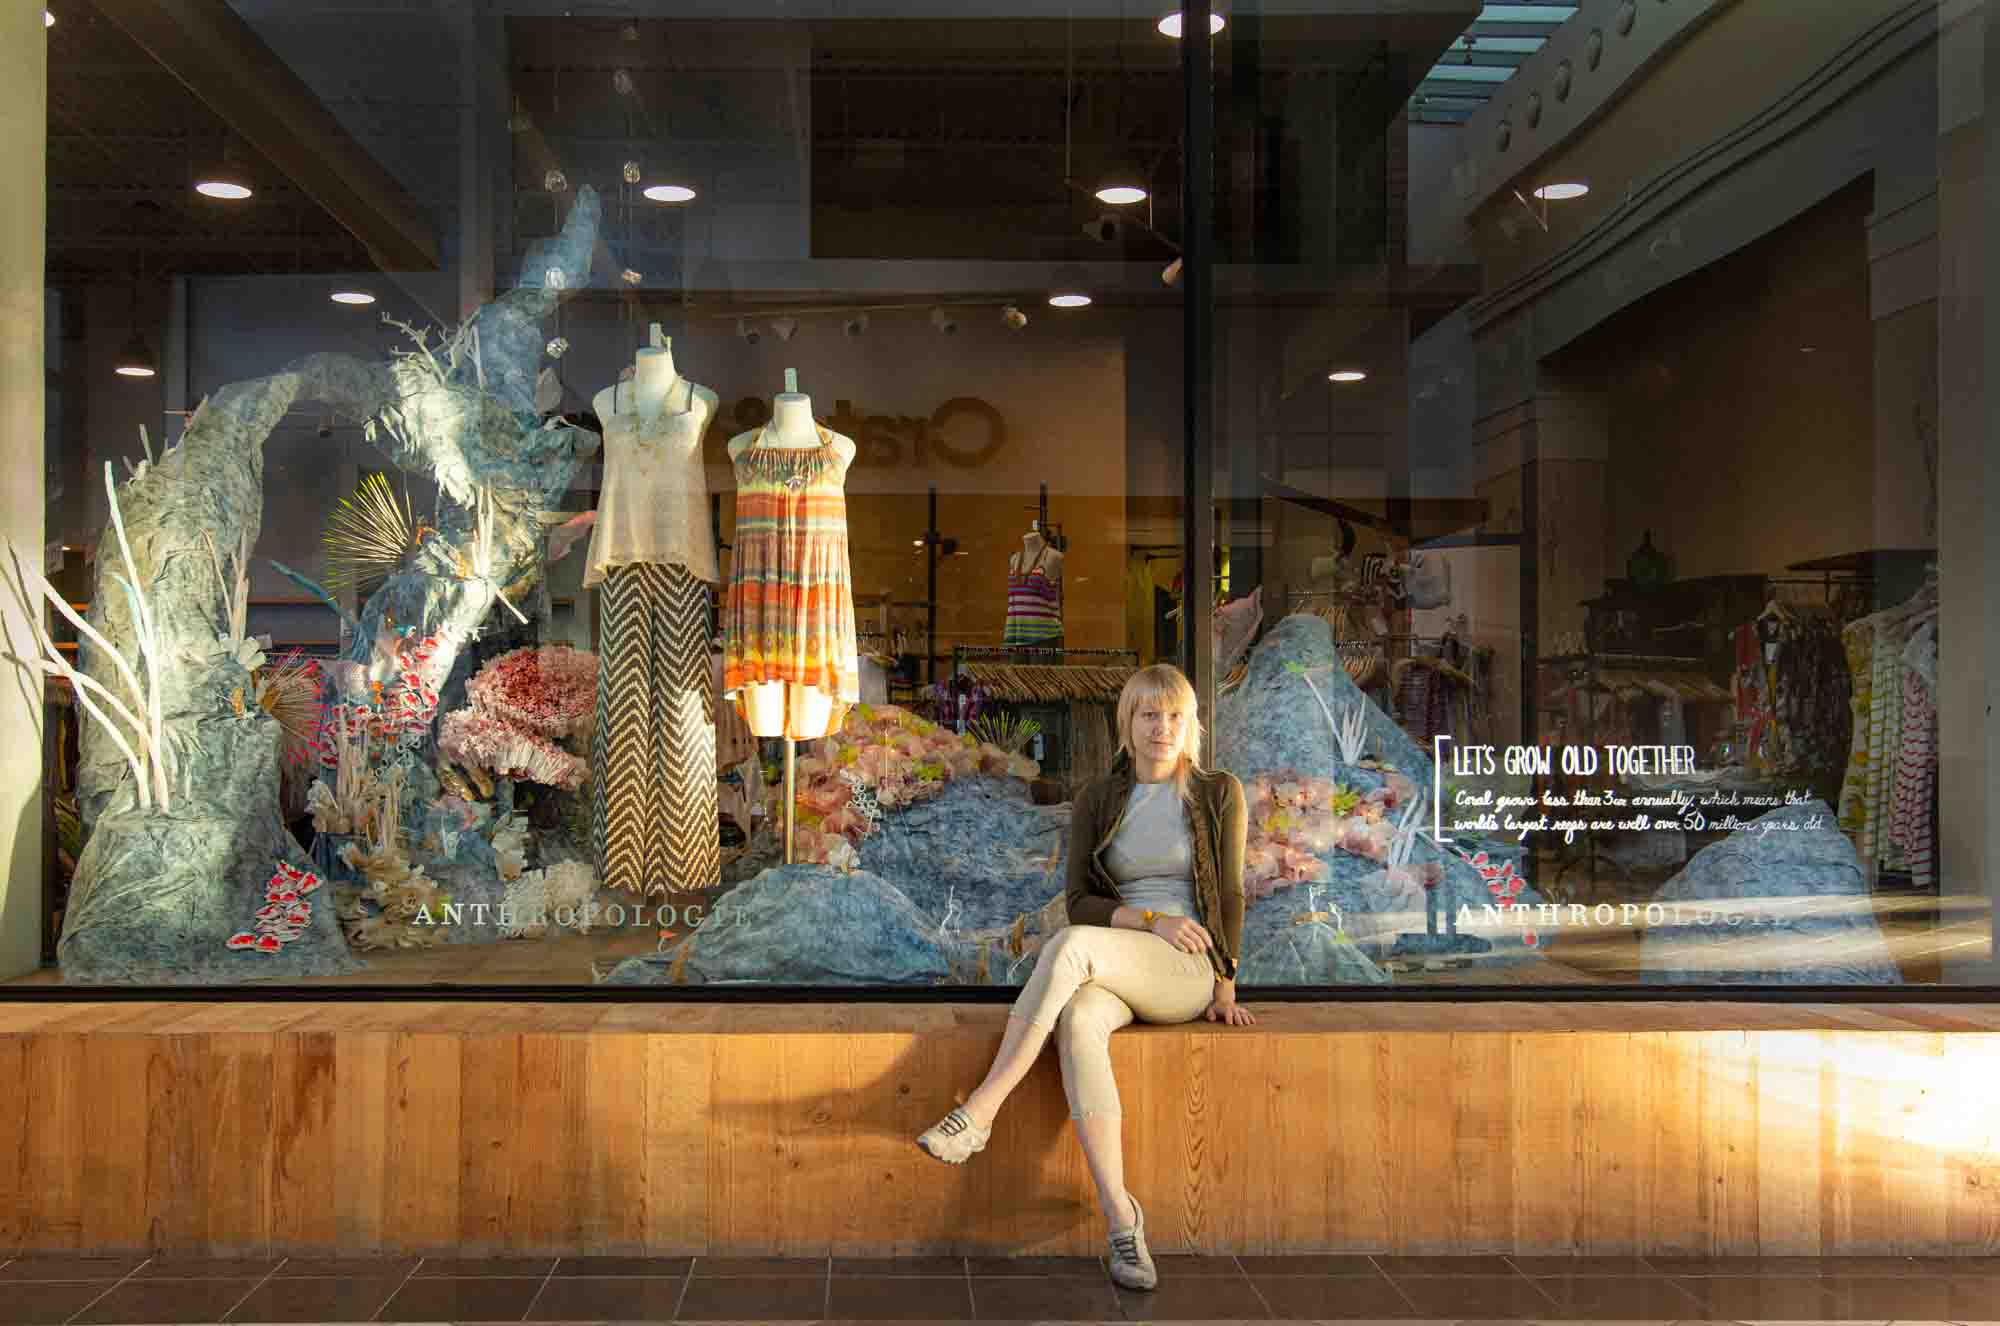 Earth Day Coral Reef Window Display at Anthropologie by Ashley Nardone